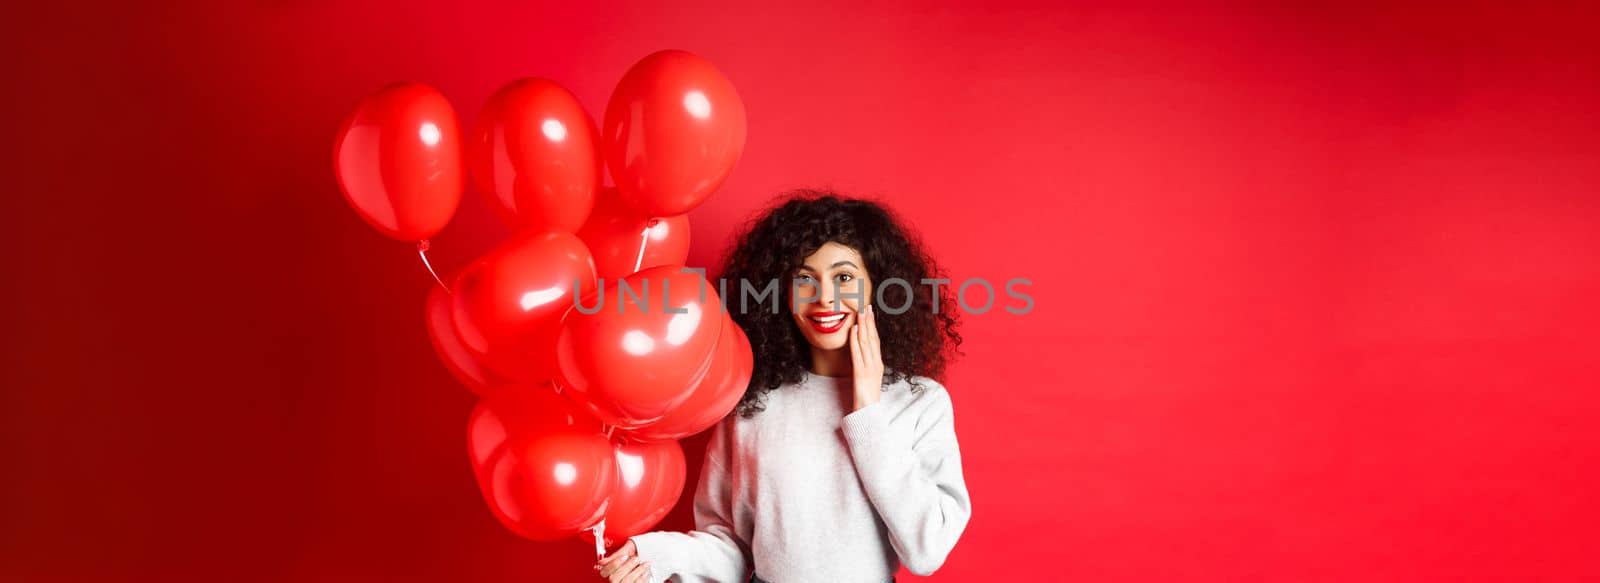 Holidays and celebration. Surprised birthday girl holding helium party balloons and looking touched at camera, being congratulated, red background.